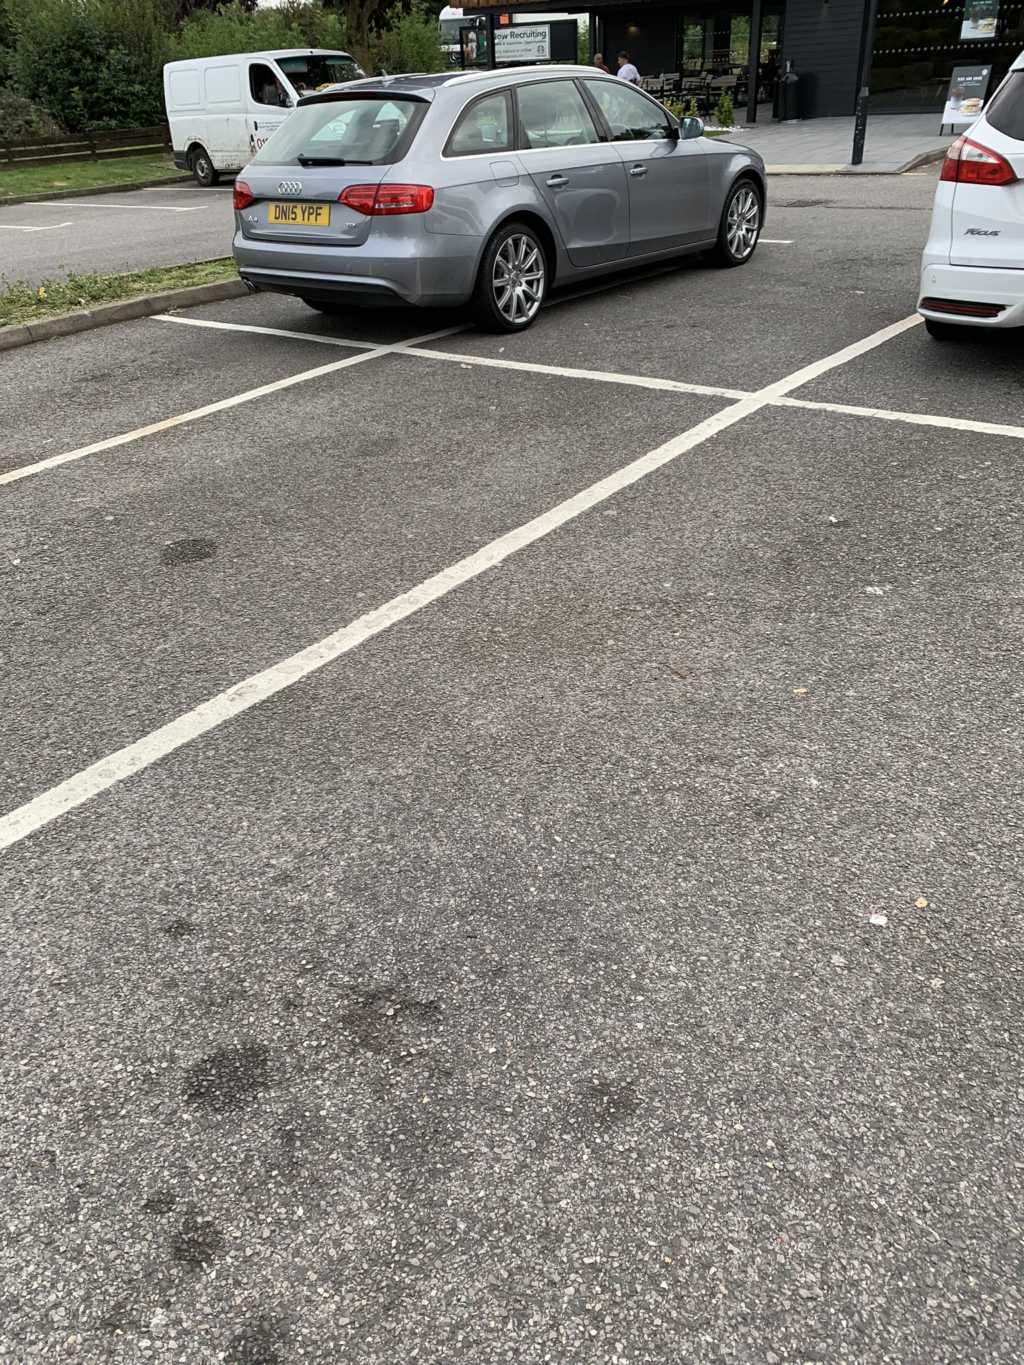 DN15 YPF is a Selfish Parker